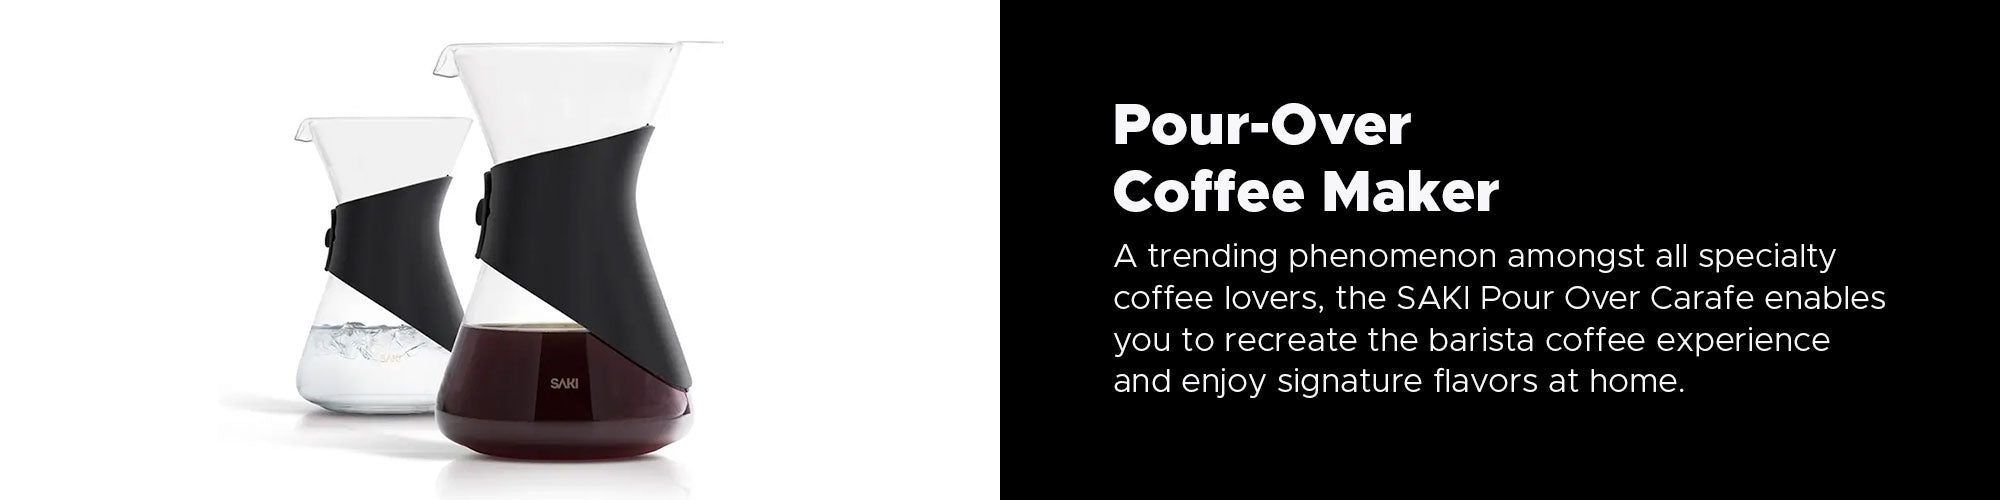 Parts - Pour Over Coffee Maker